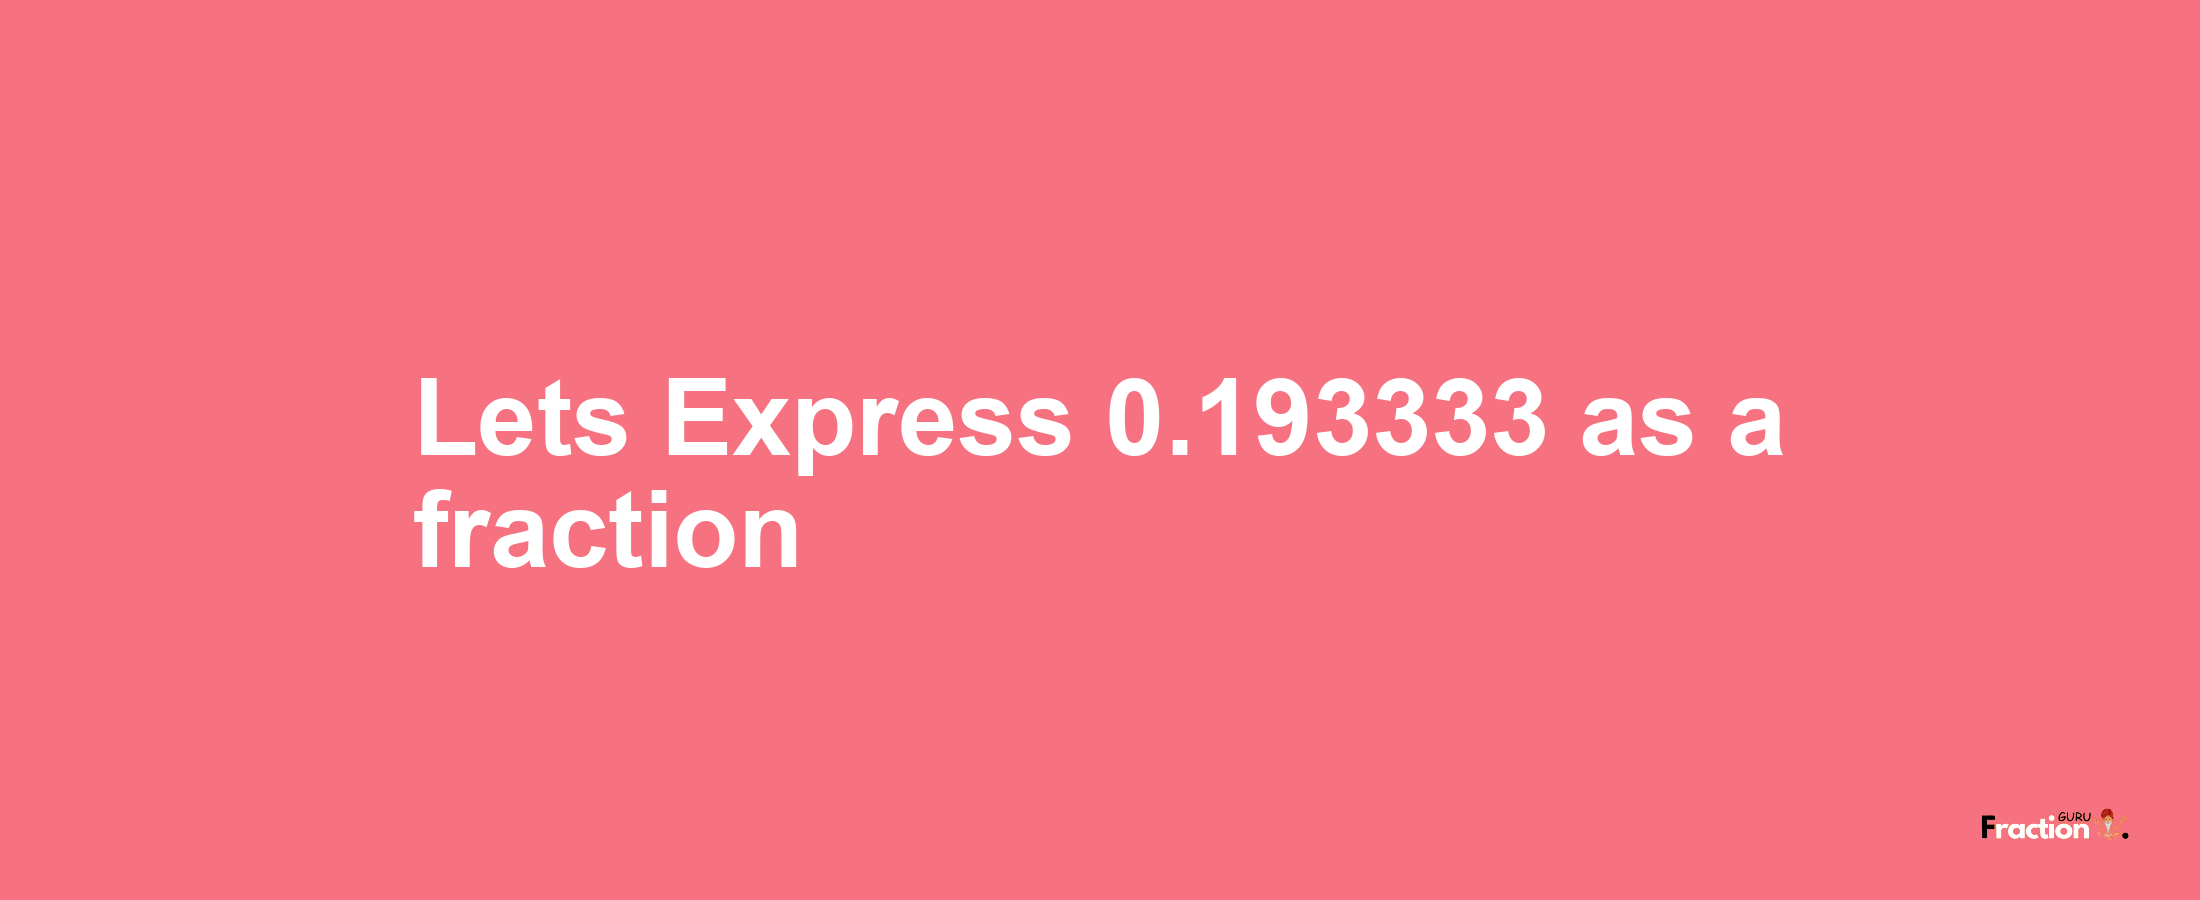 Lets Express 0.193333 as afraction